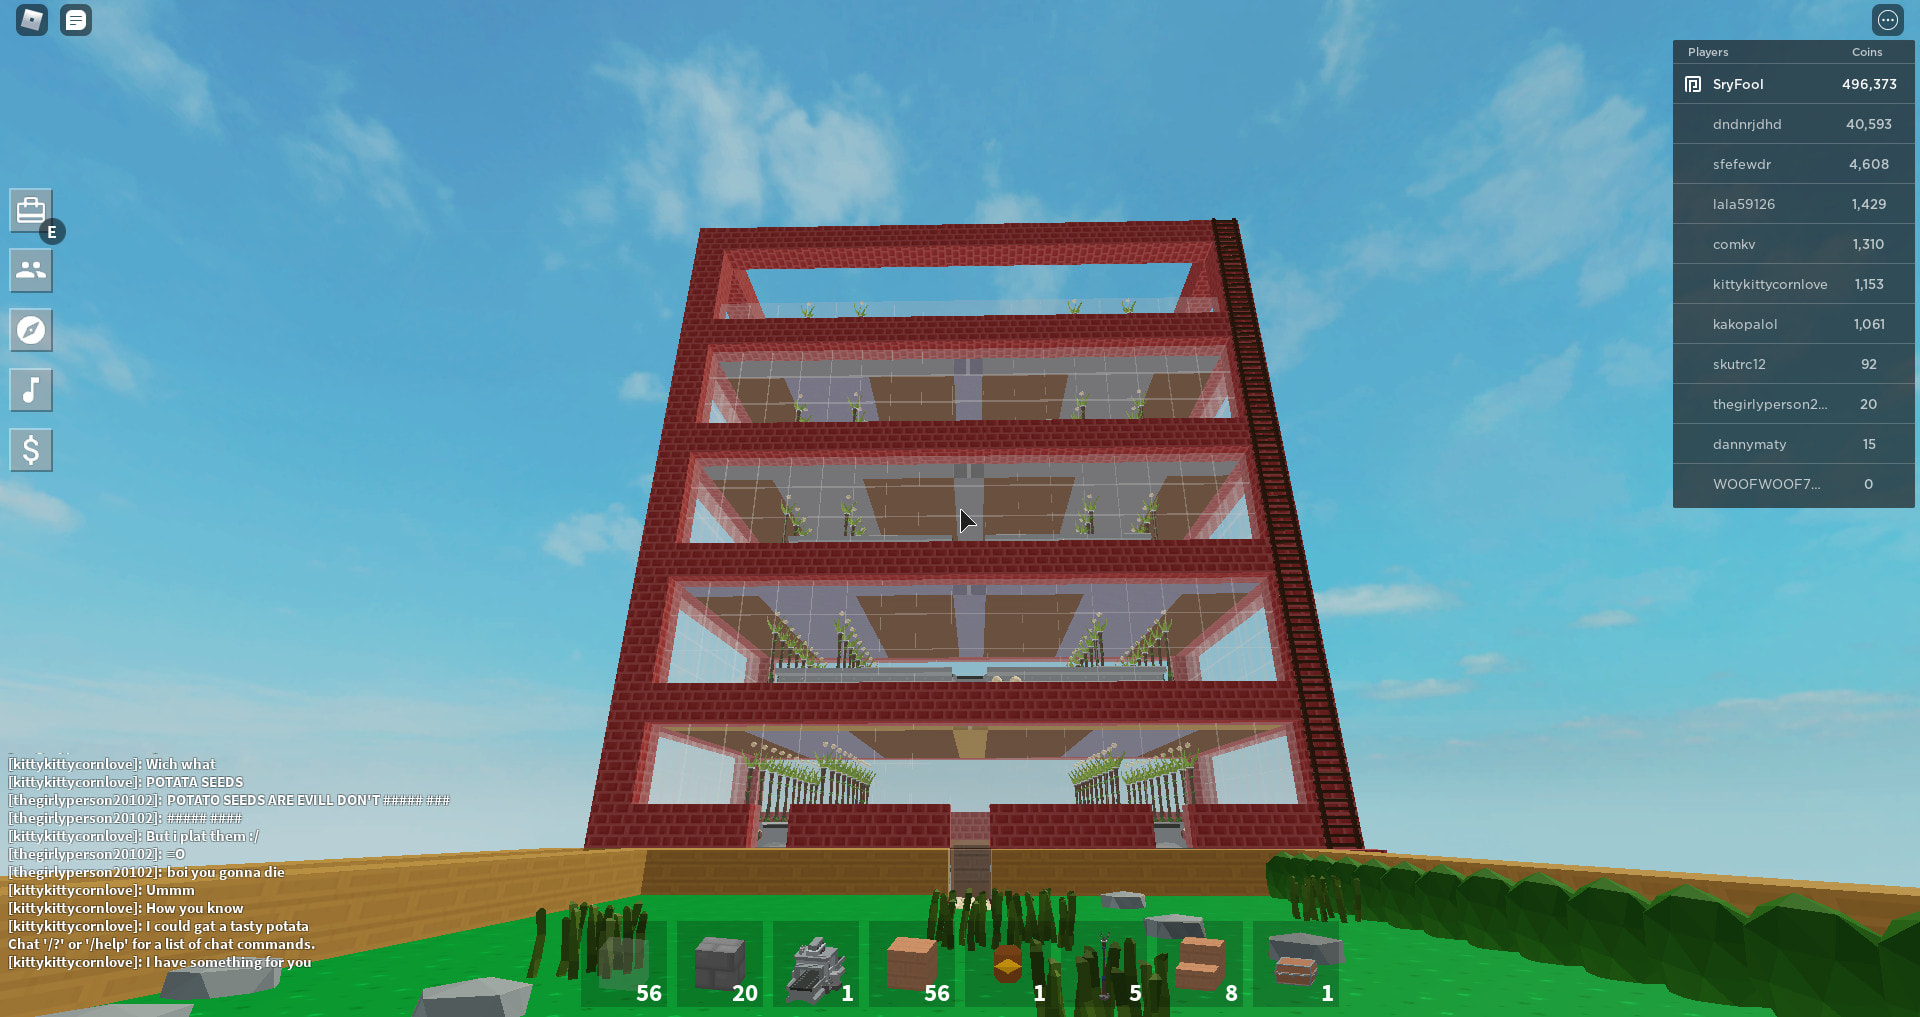 Build You A Farm On Sky Block Roblox By Sryfool - condo files for roblox